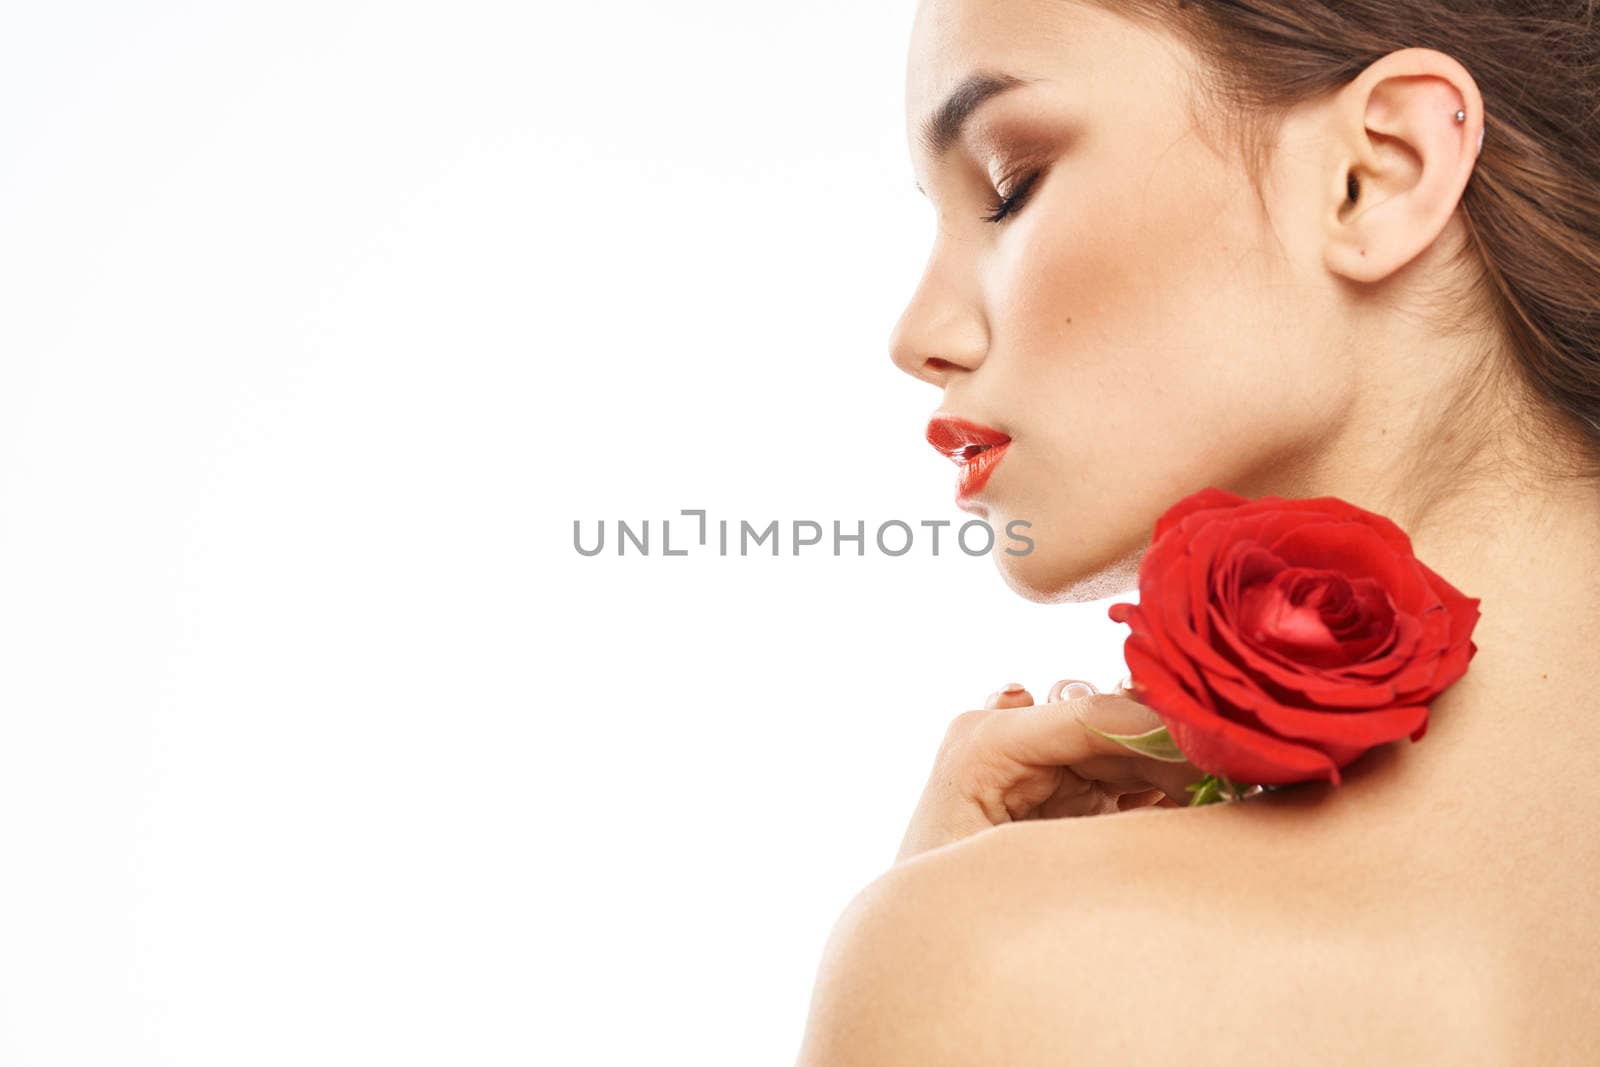 Portrait of woman with red rose naked shoulders Make-up on brunette face by SHOTPRIME